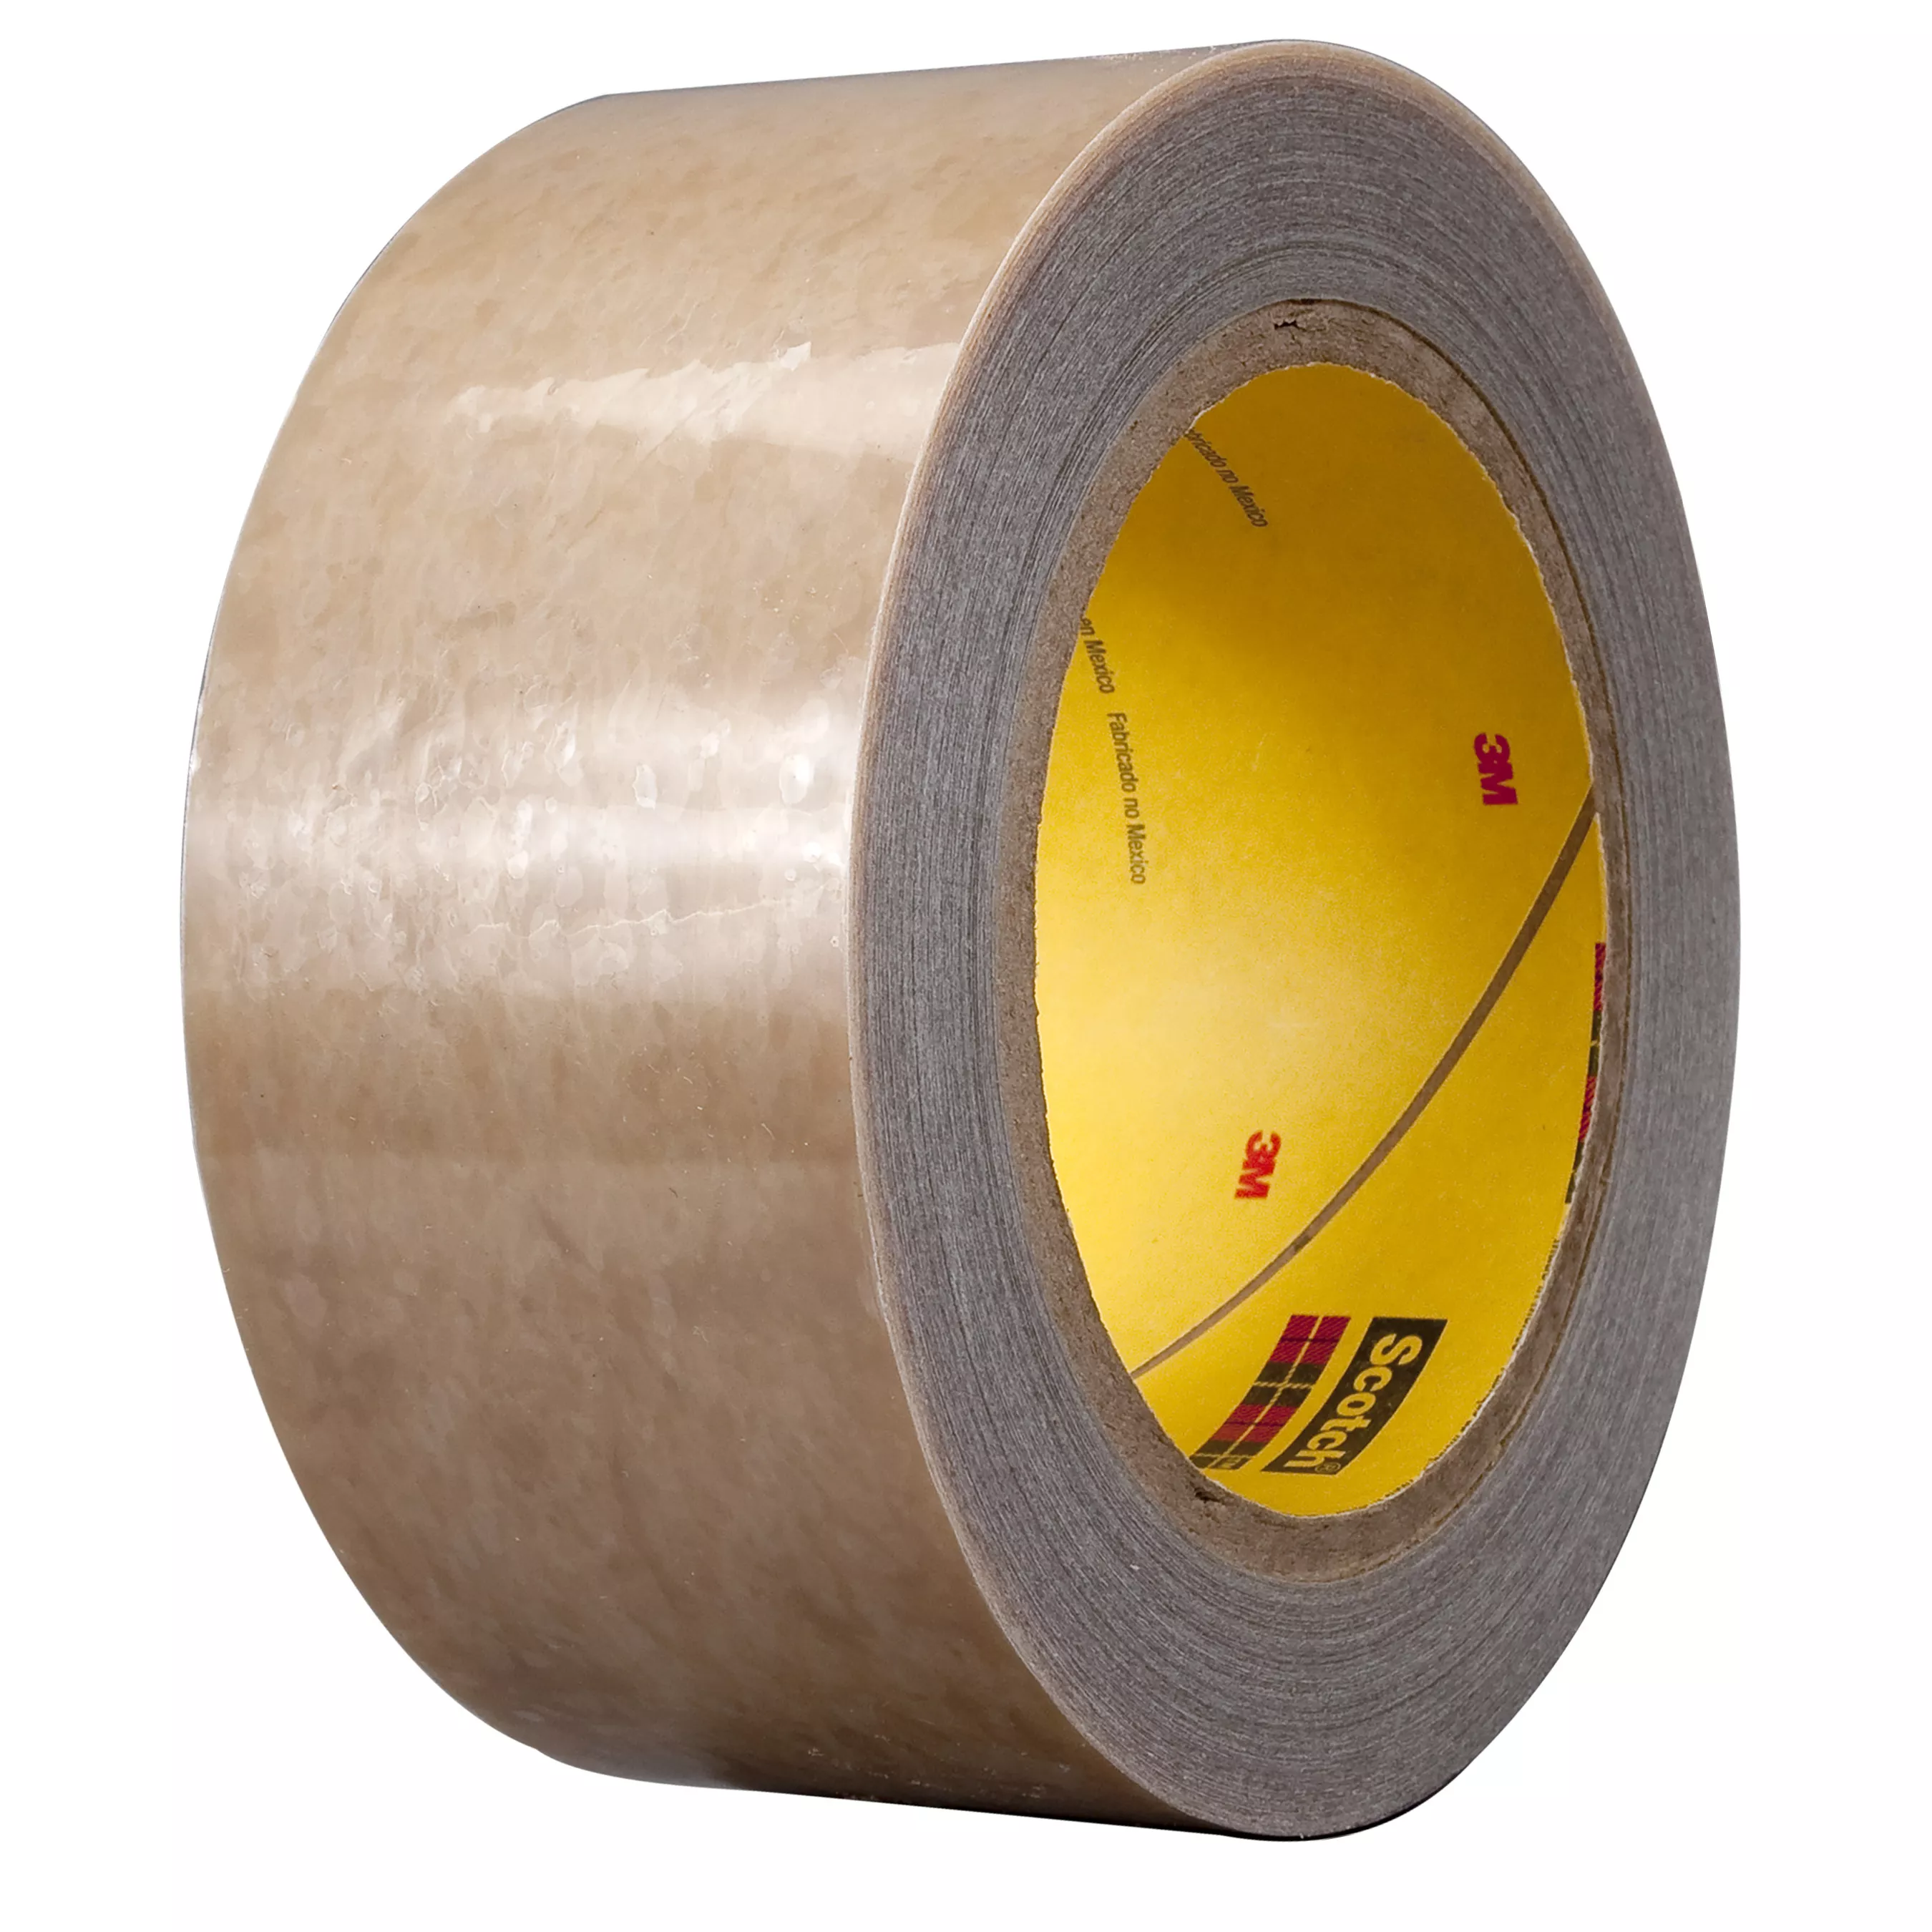 3M™ Polyester Protective Tape 336, Transparent, 12 in x 144 yd, 1.5 mil,
1 Roll/Case